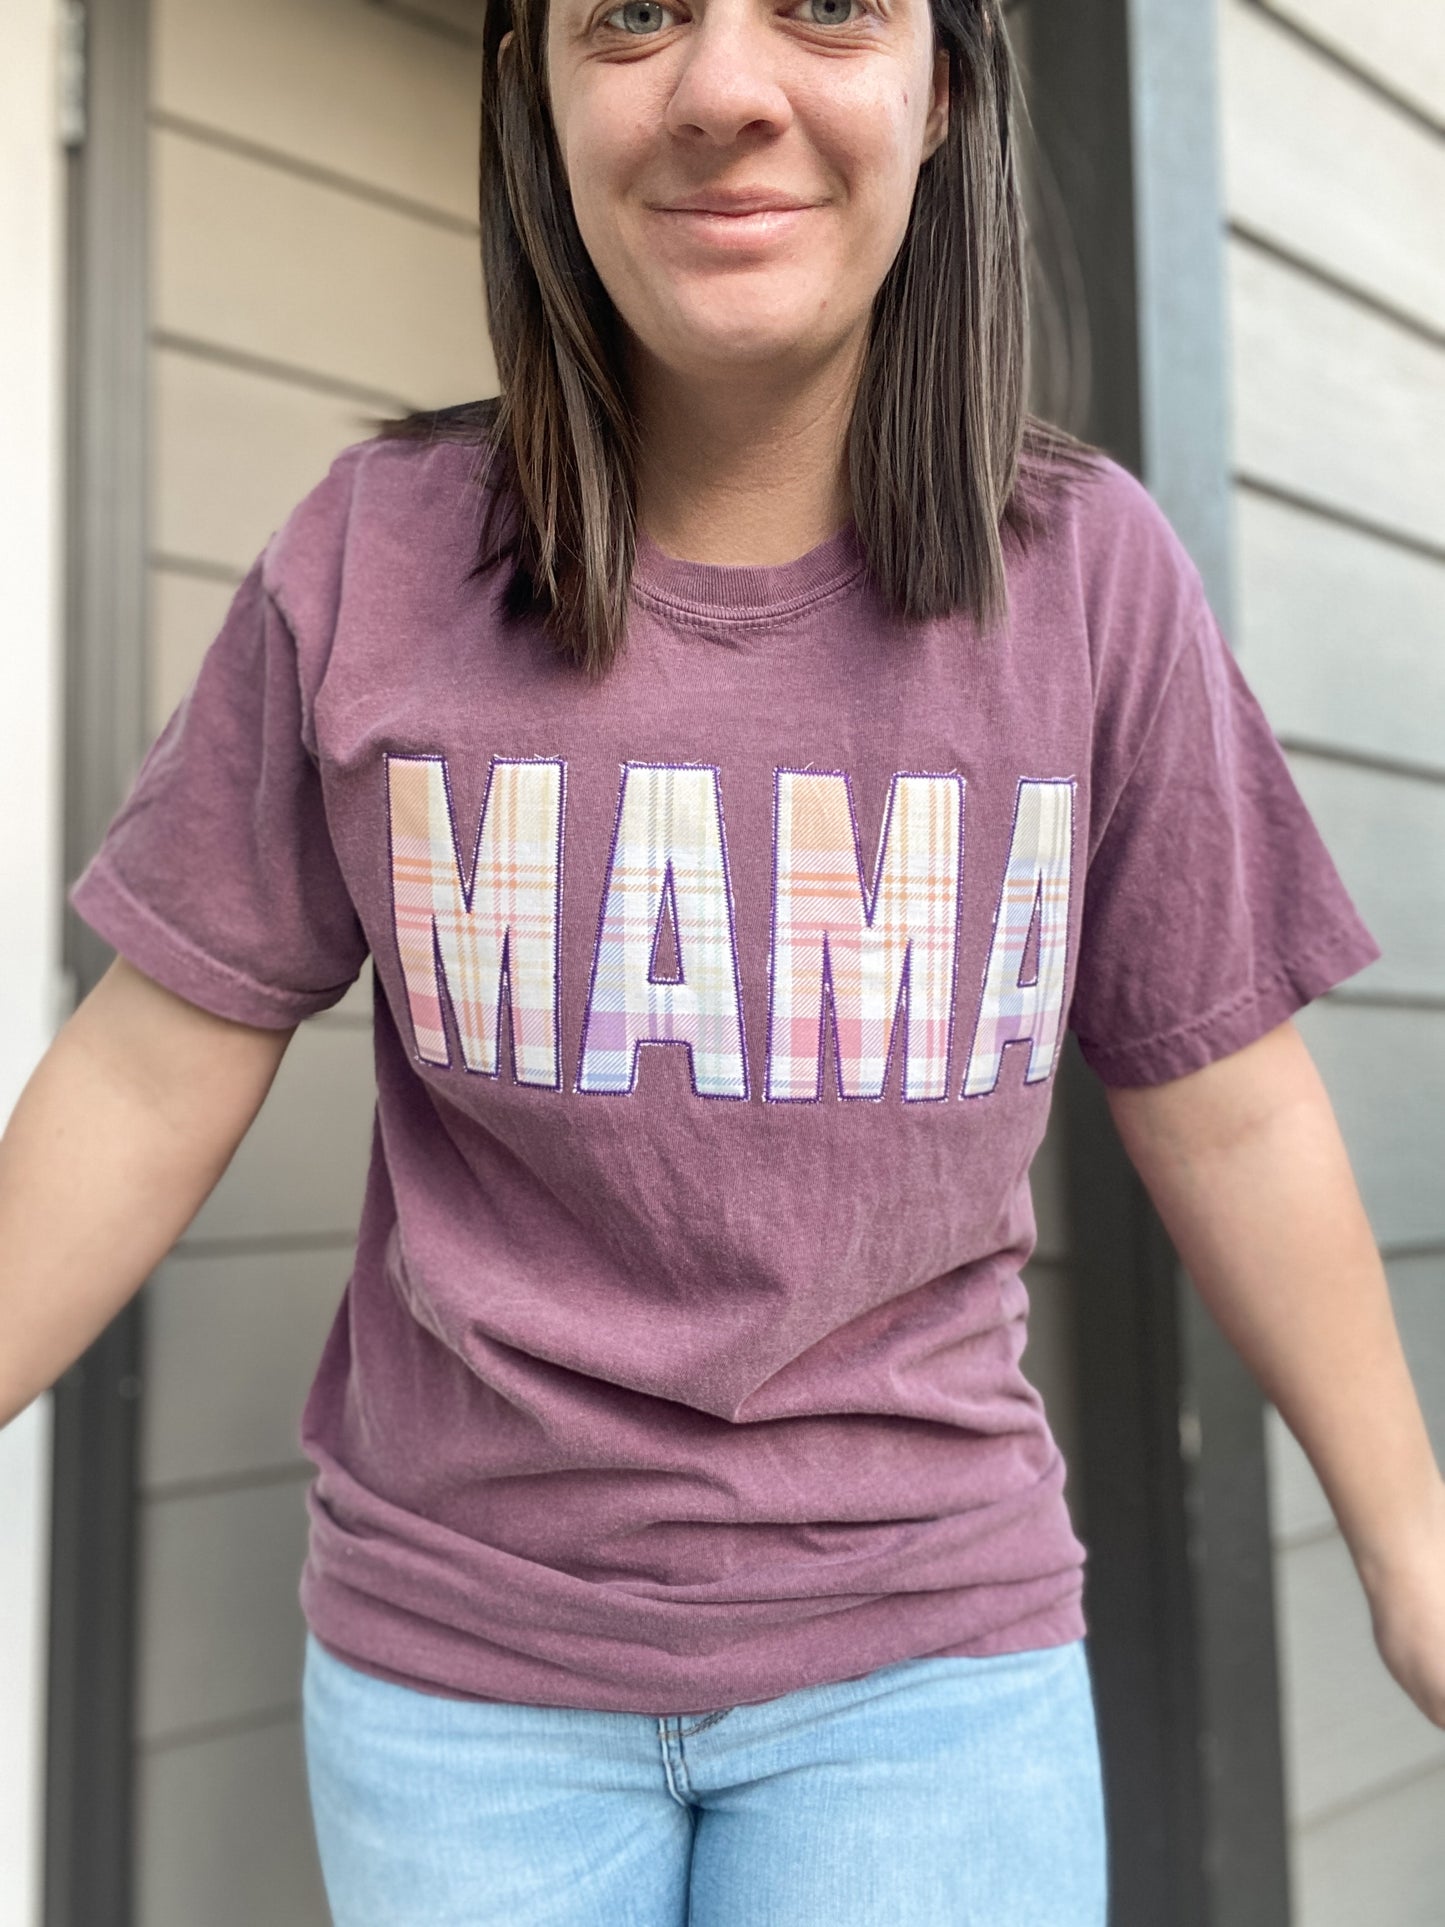 MAMA Applique Embroidered Tee